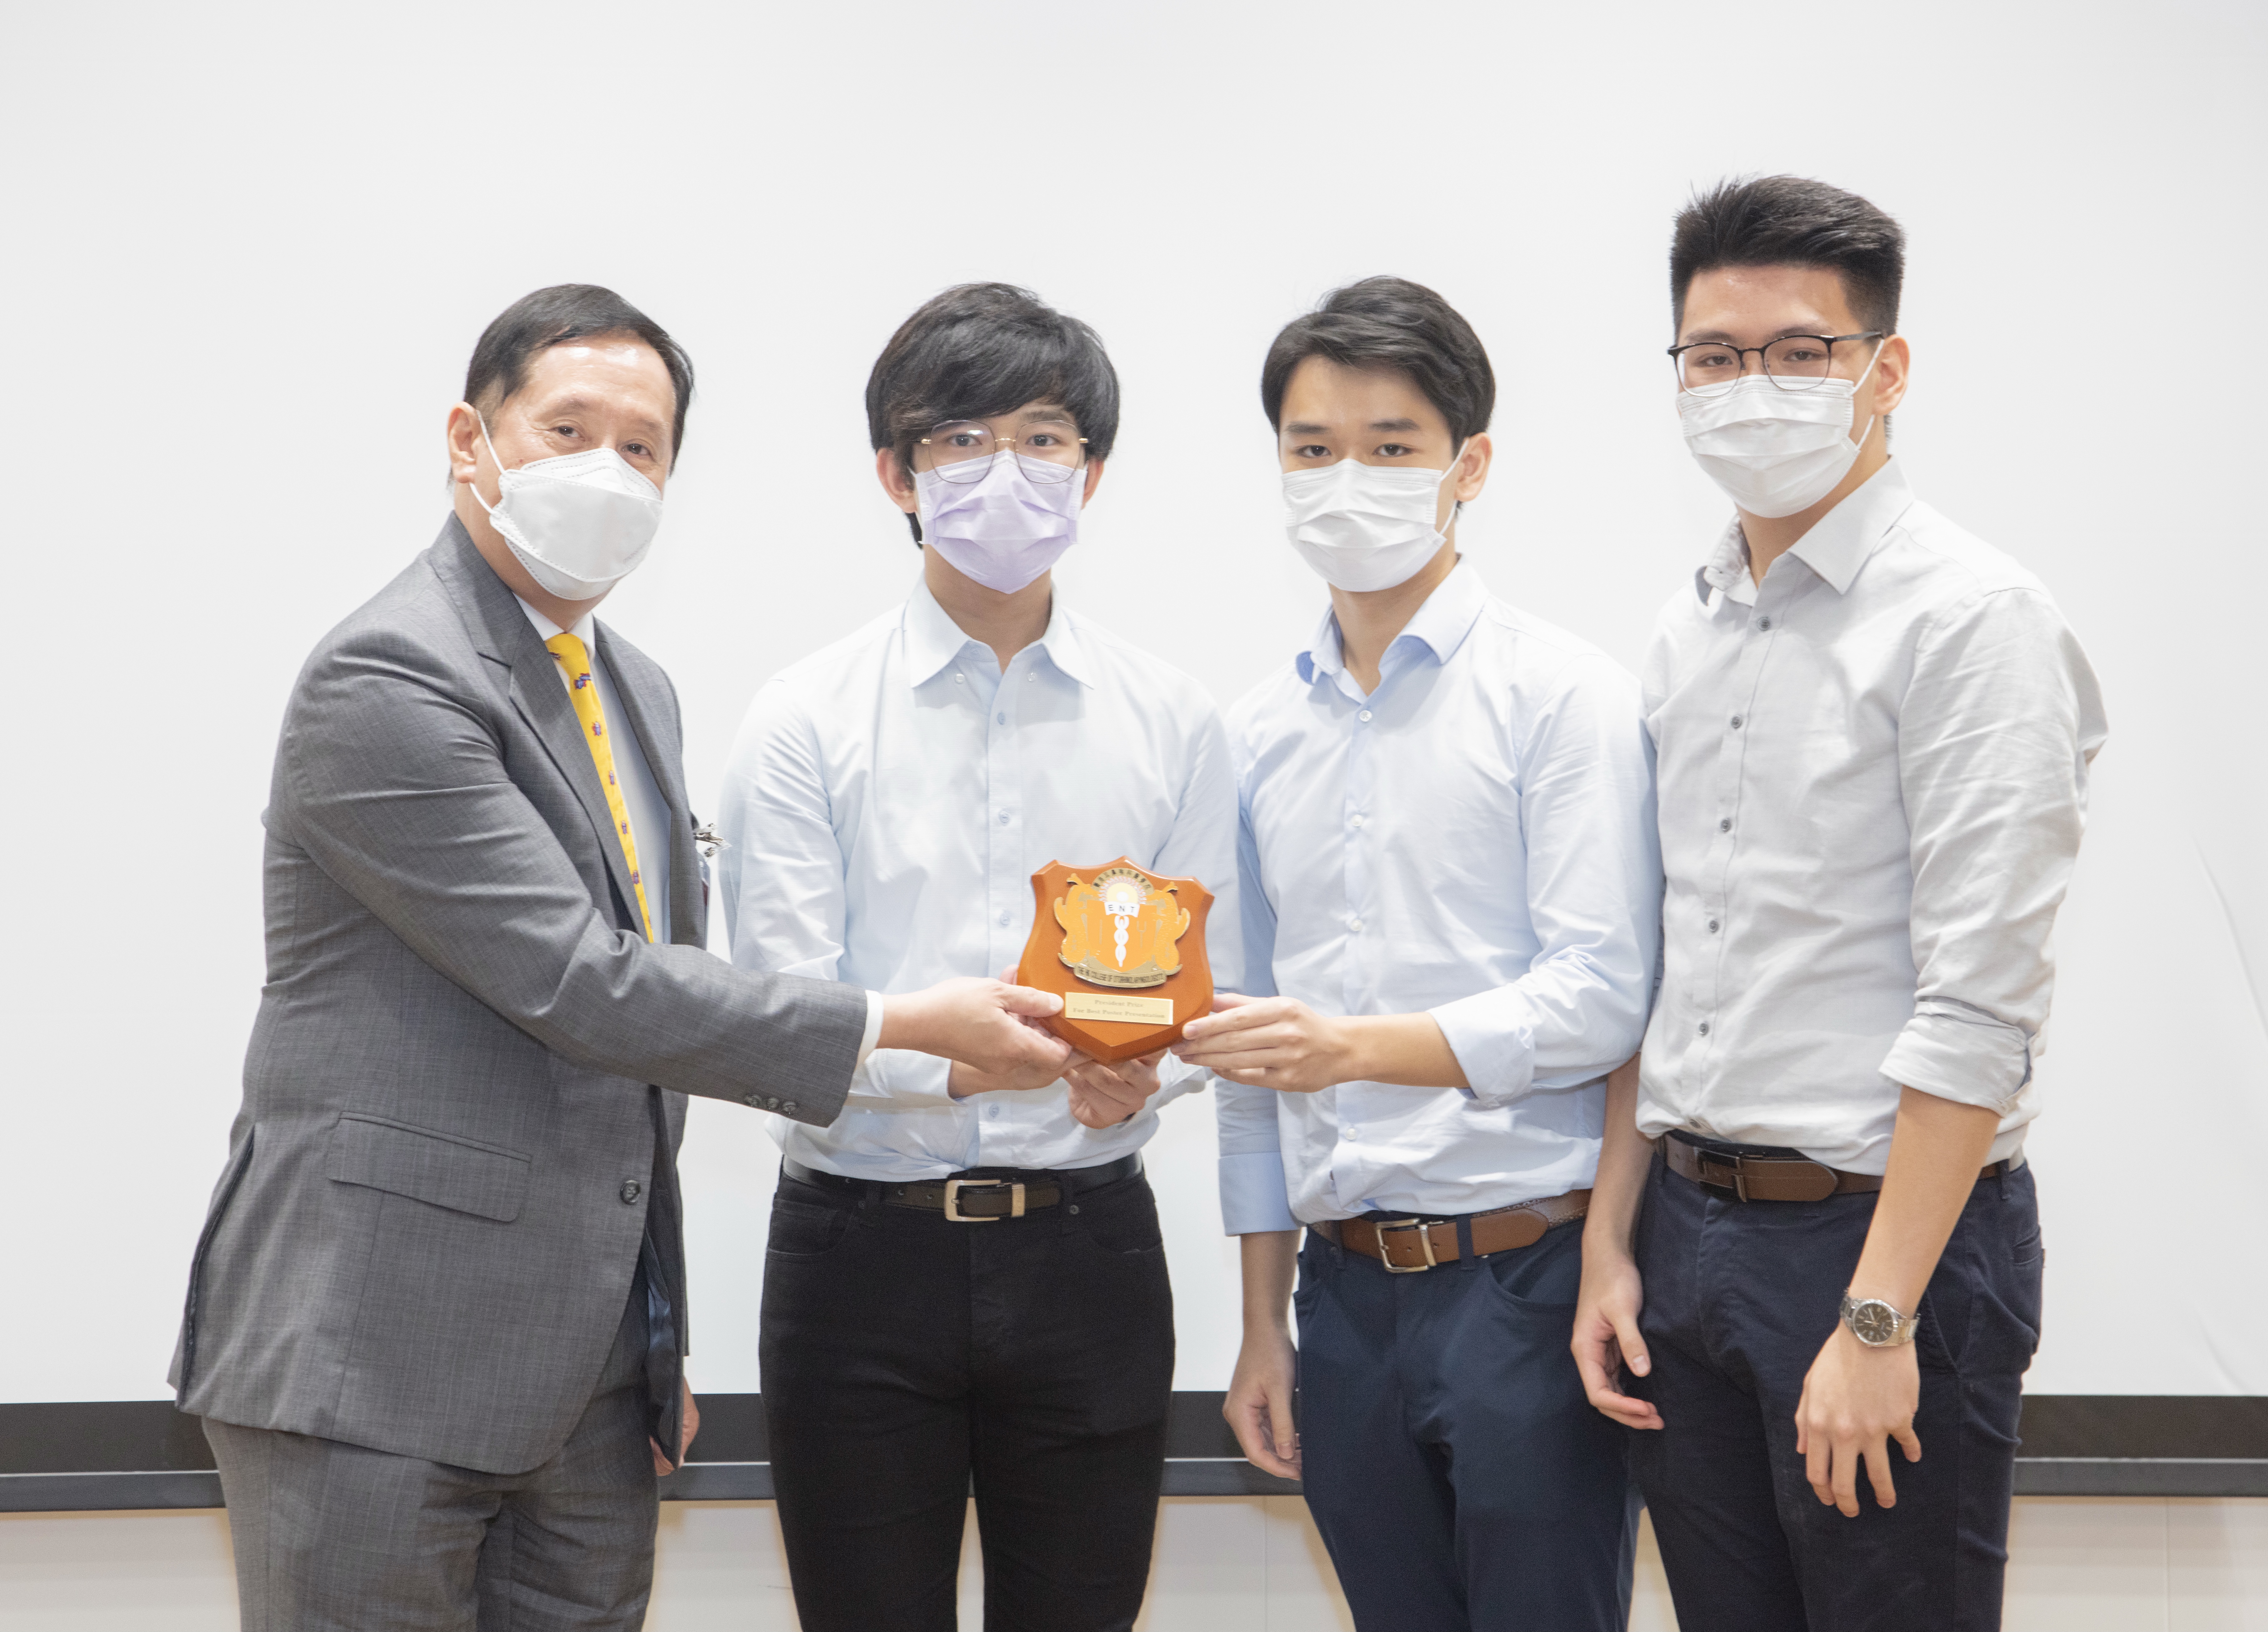 The students receives the prize from Dr Victor Abdullah (1st from the left), the President of The Hong Kong College of Otorhinolaryngologists.